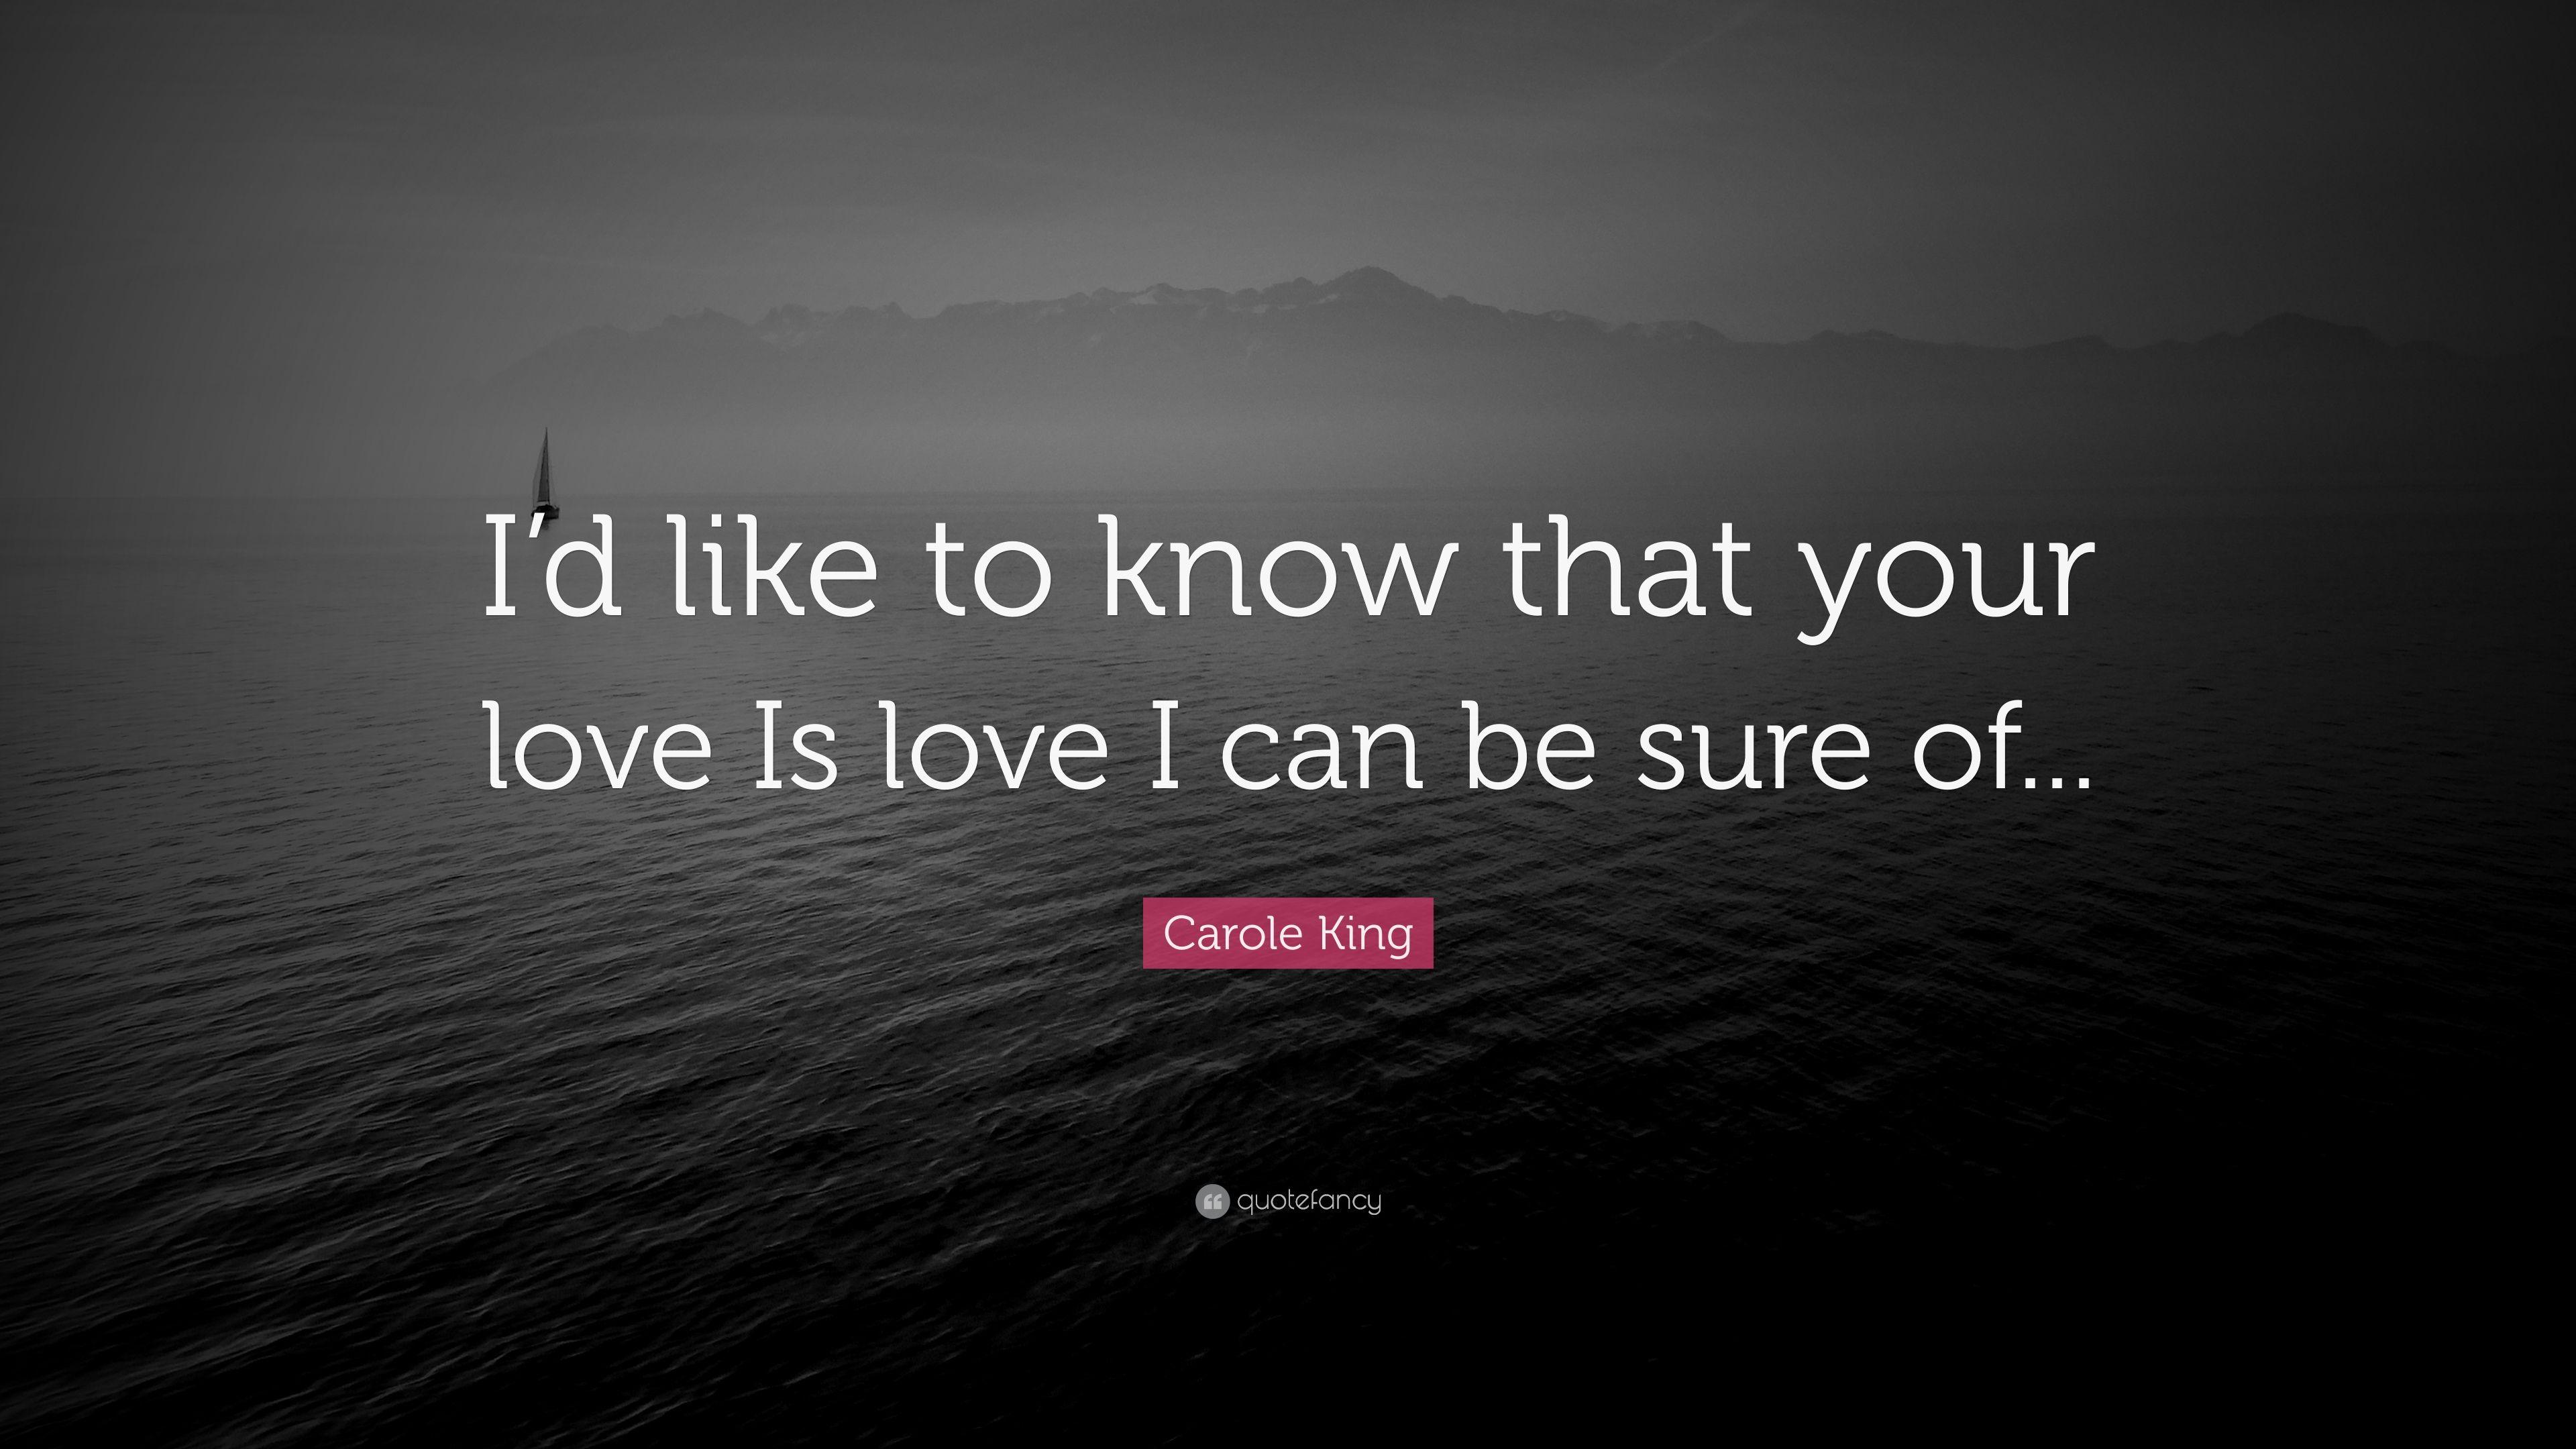 Carole King Quote: “I'd like to know that your love Is love I can be